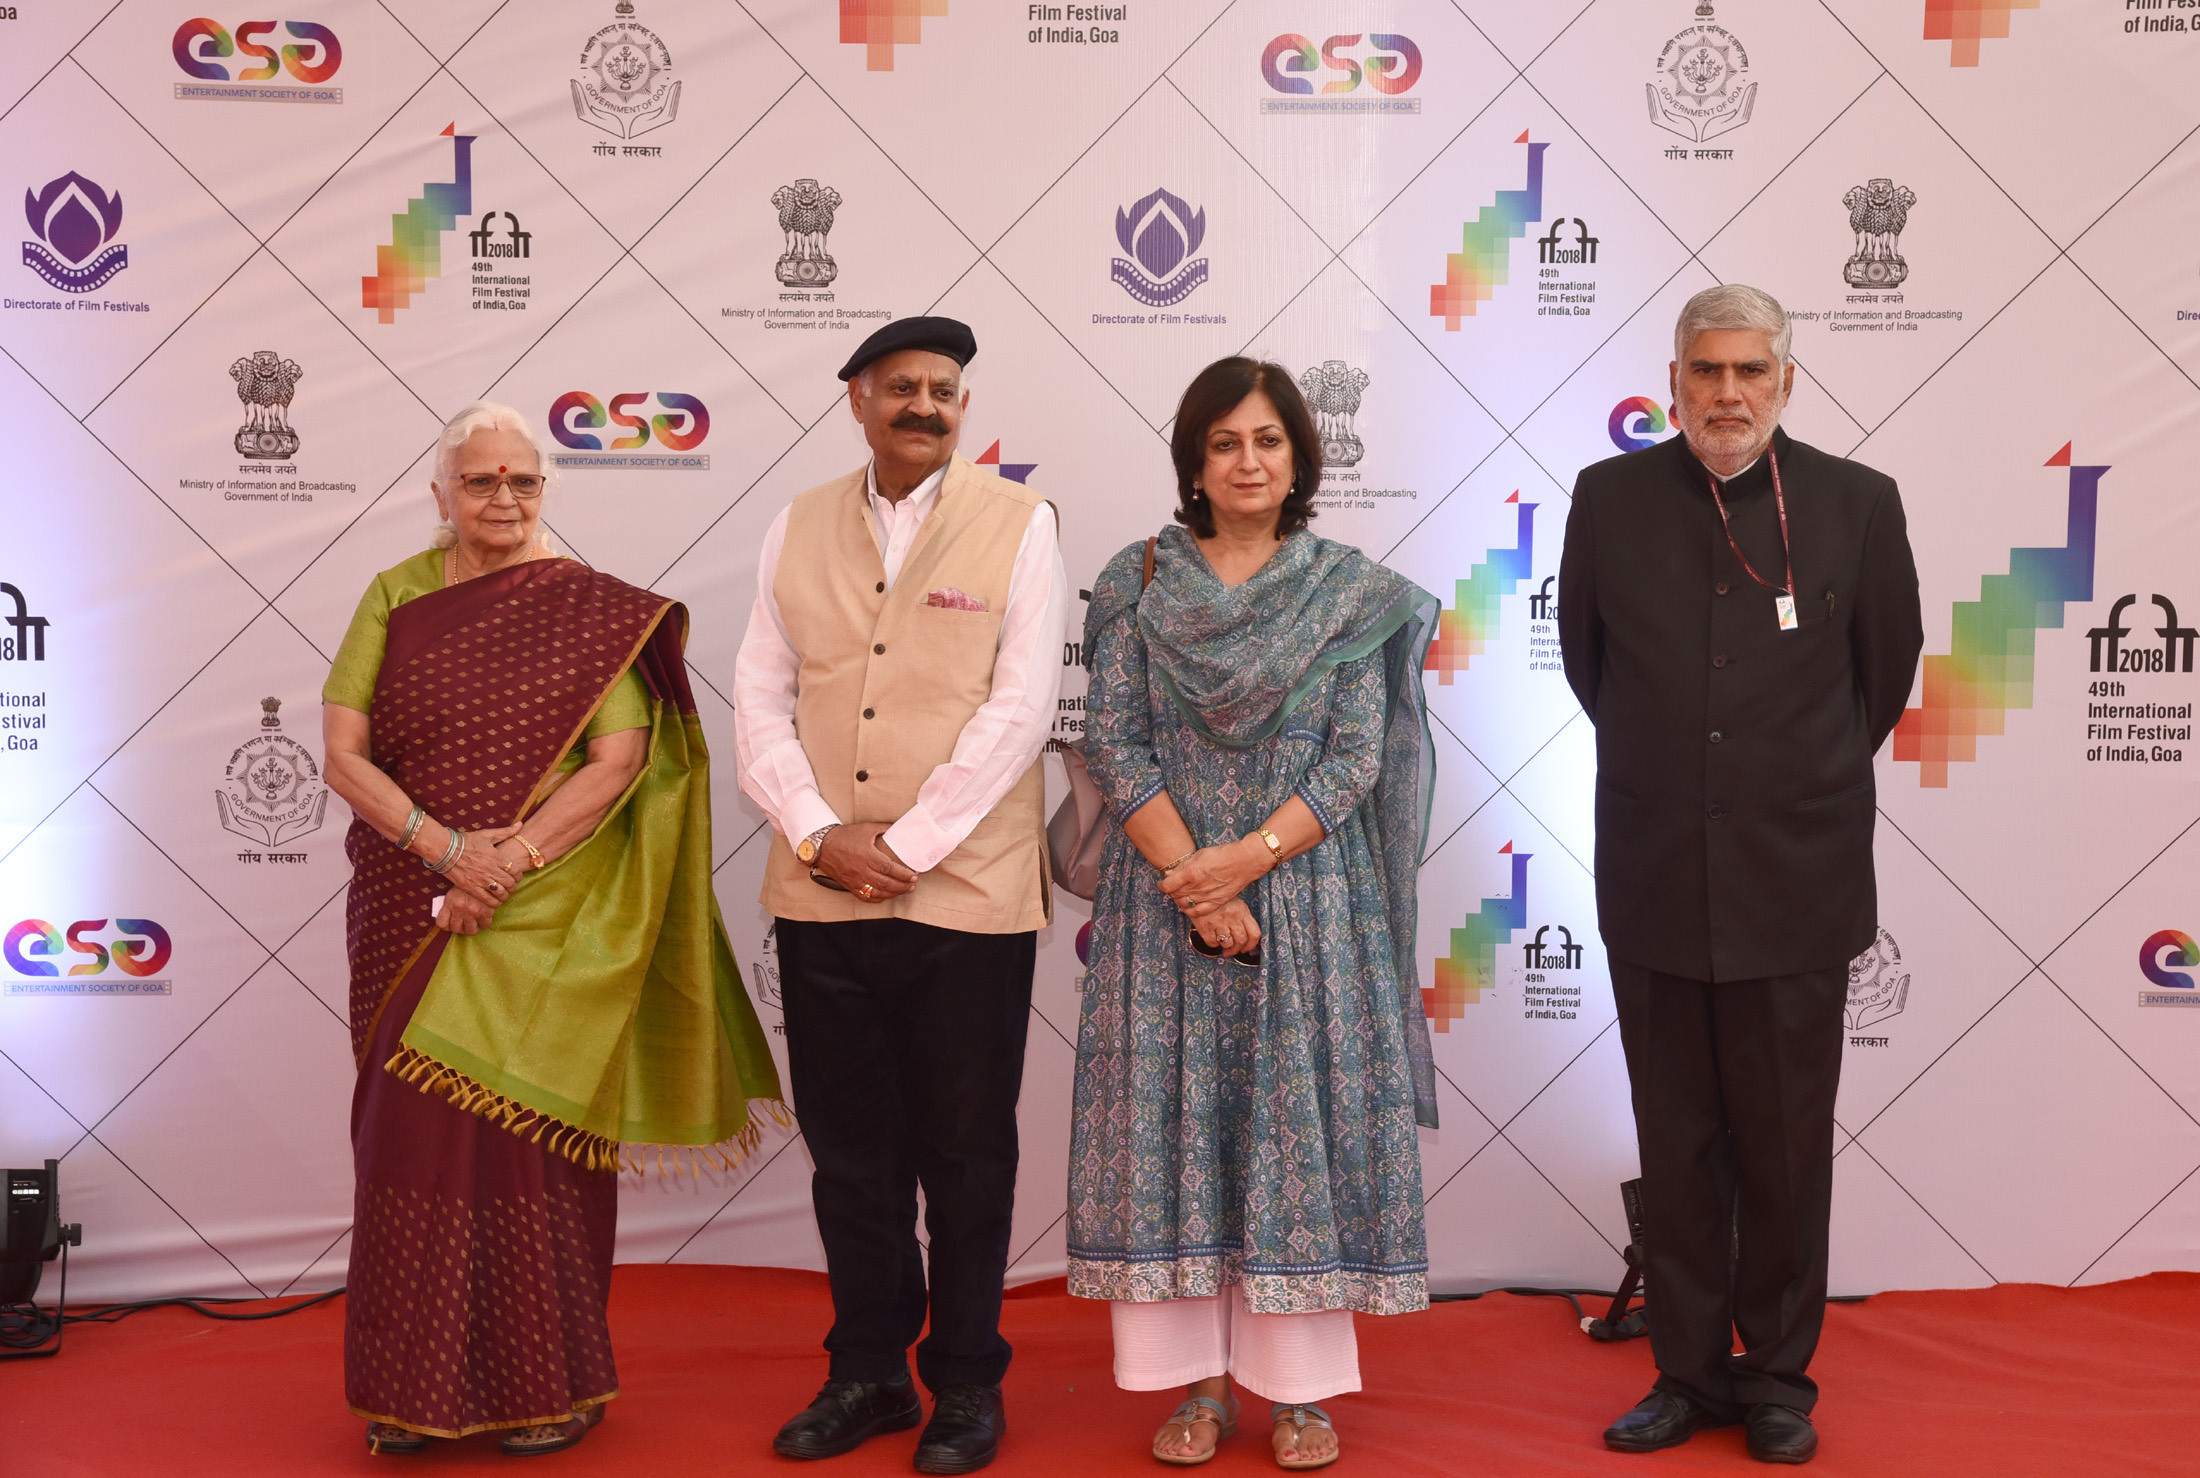 Hon’ble Governor of Goa , Chief Secretary of Goa with others during the opening ceremony.